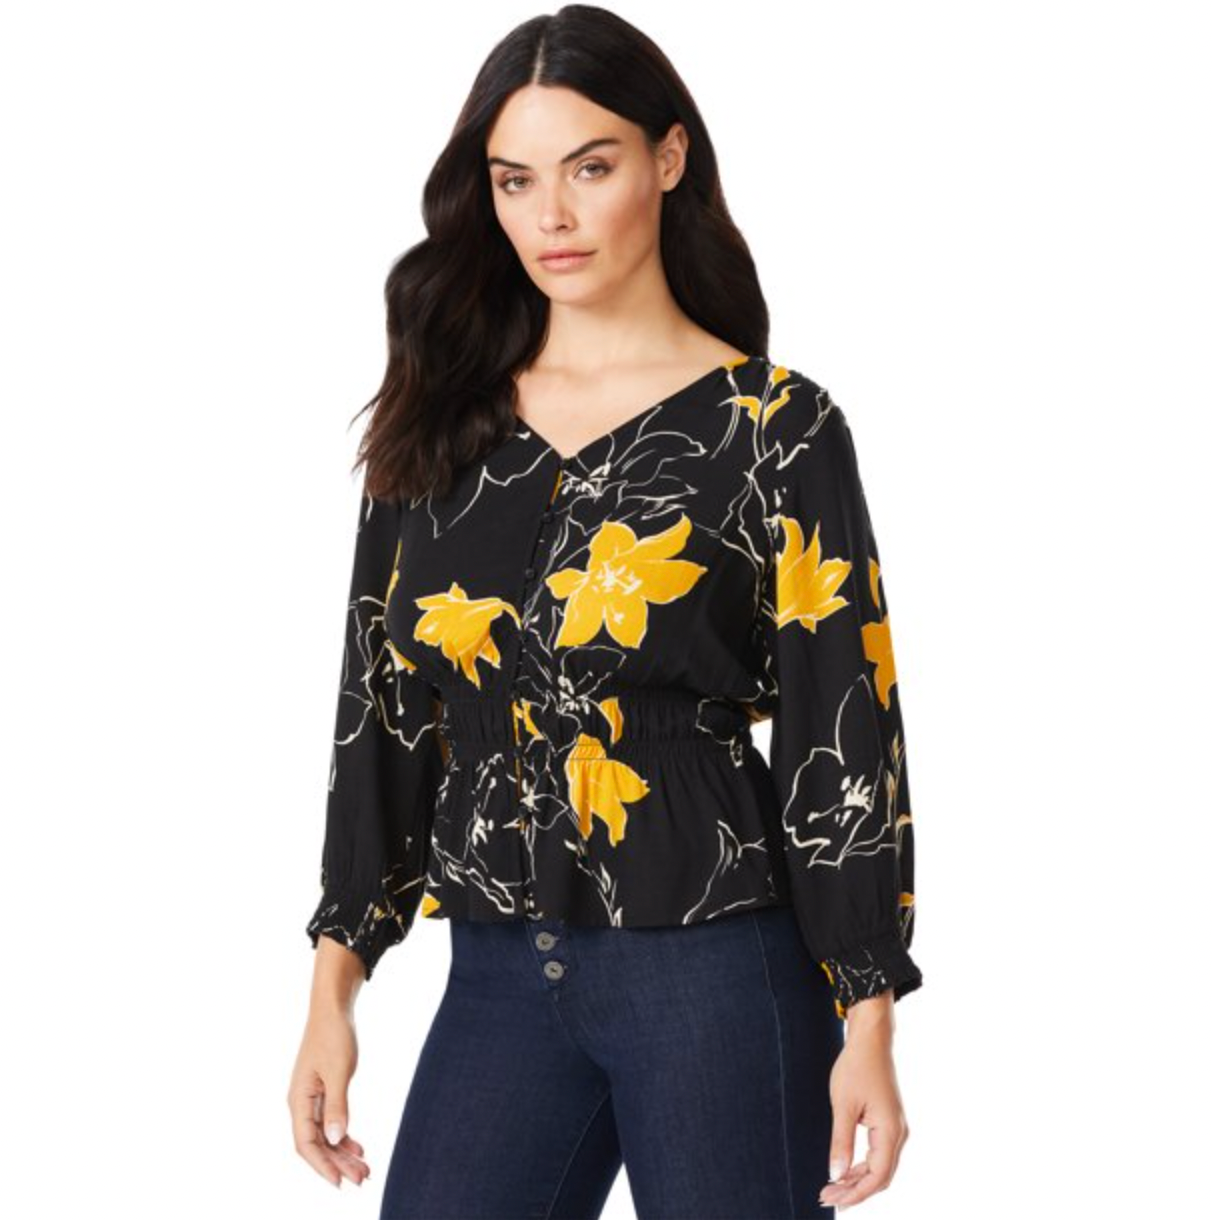 Sofia Jeans by Sofia Vergara Women's Print Top with 3/4 Puff Sleeves